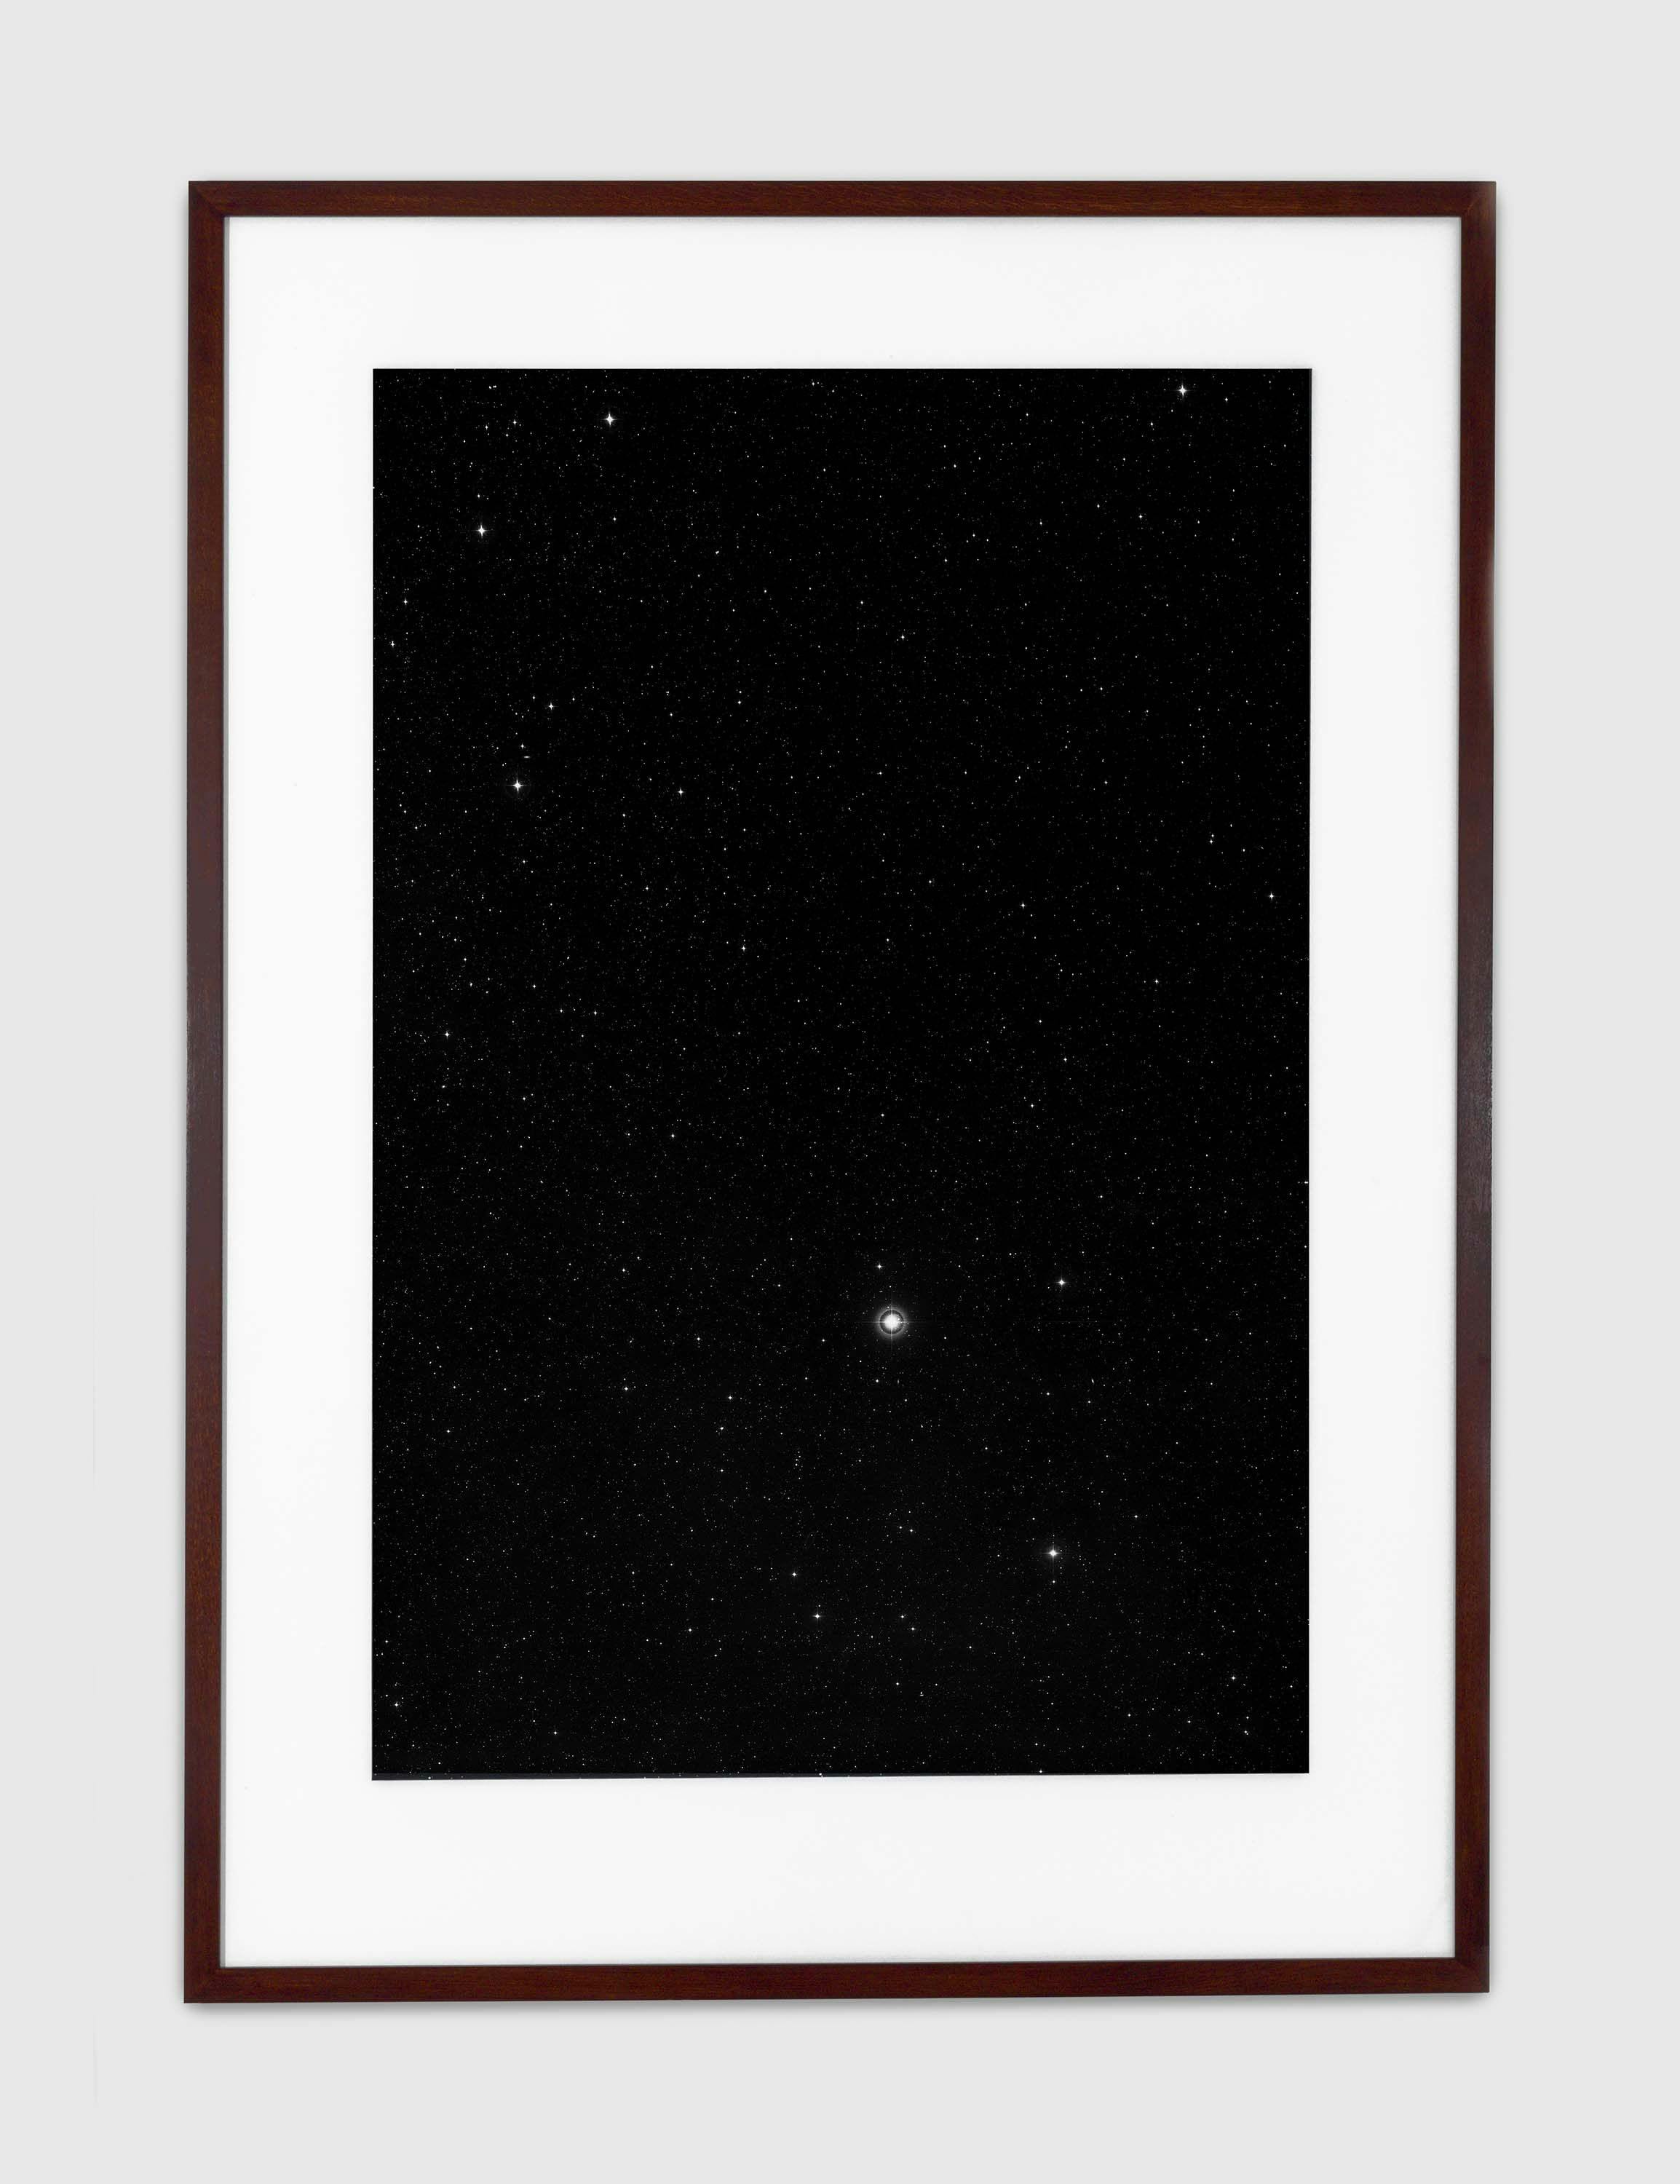 A chromogenic print with Diasec by Thomas Ruff, titled Stern 20h 48m/-35°, dated 1992.